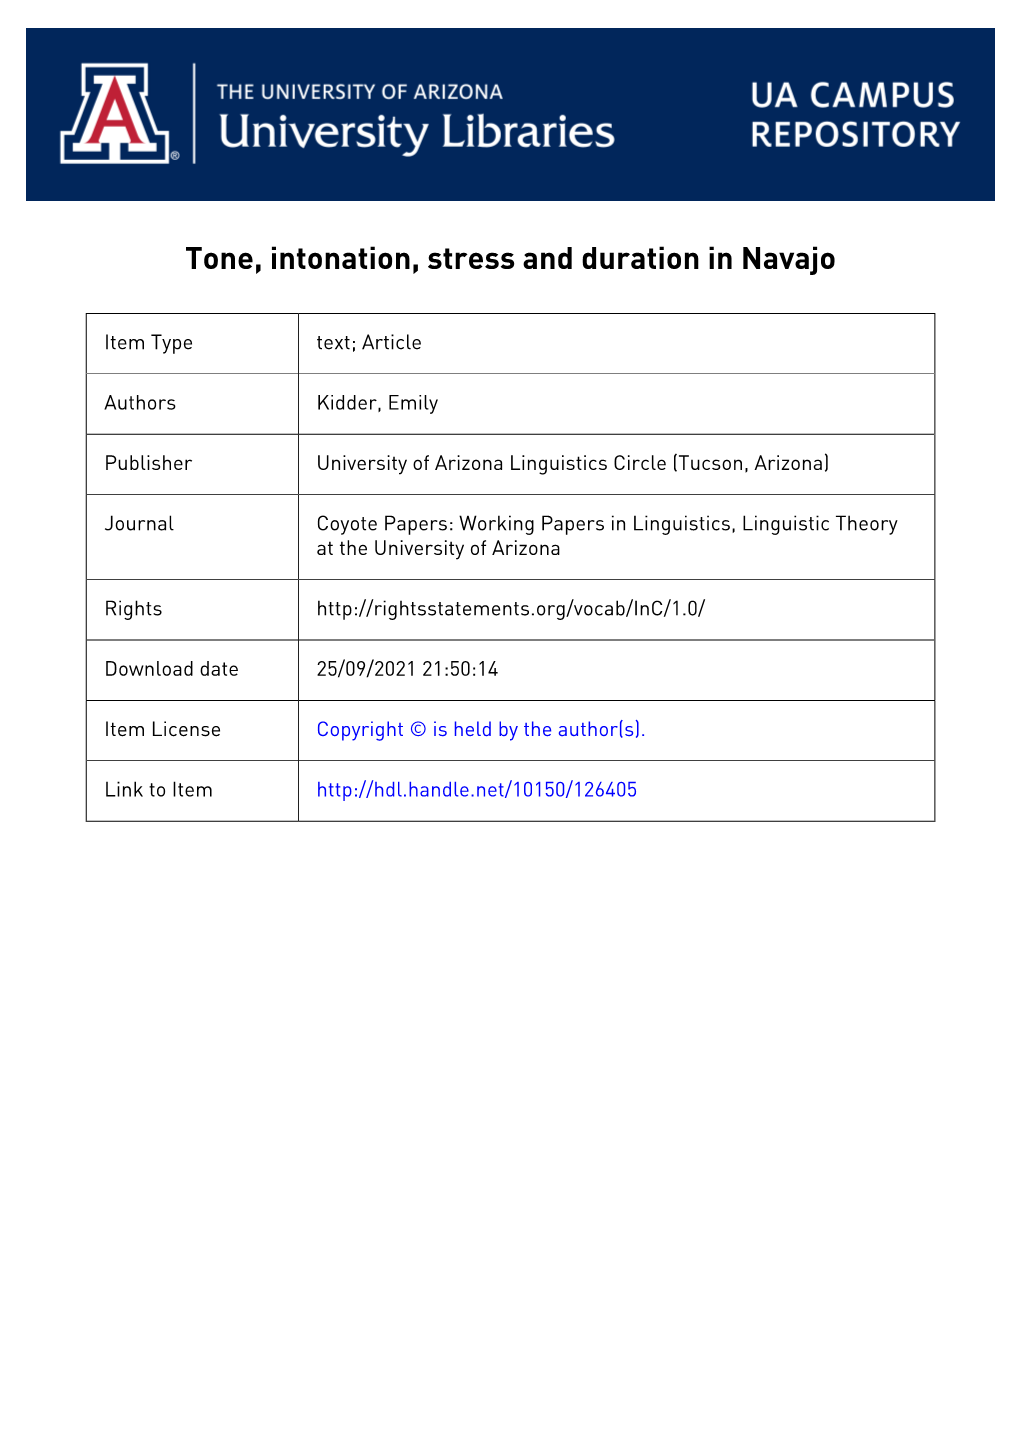 Tone, Intonation, Stress and Duration in Navajo